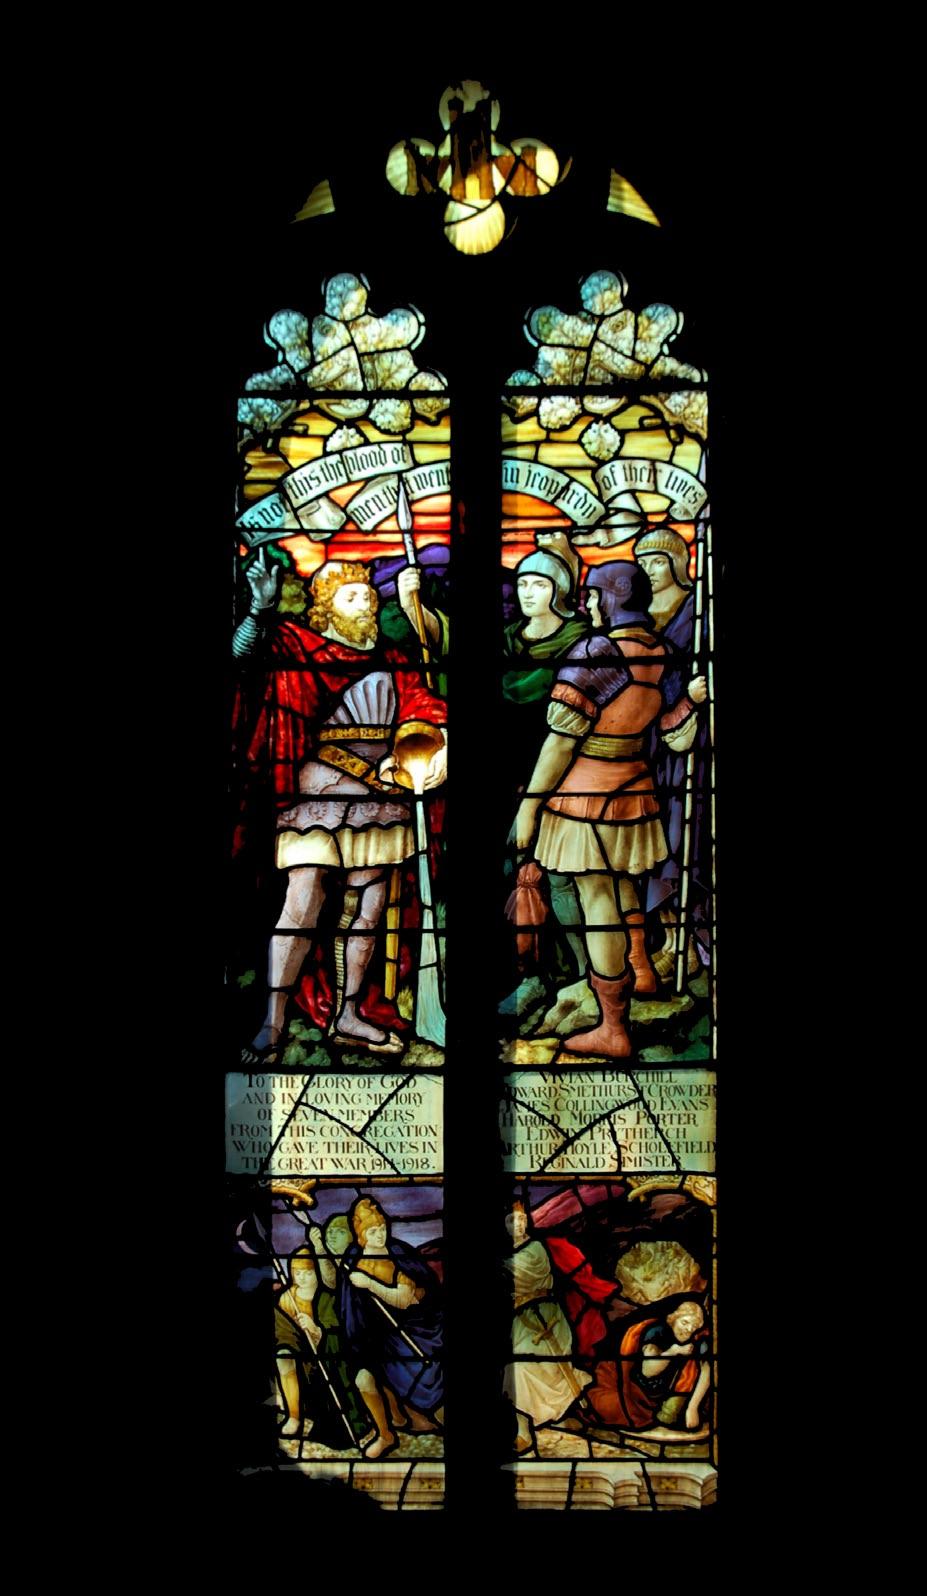 World War I The WW1 Memorial Window, also by Bacon Brothers was dedicated on 10 th October 1920 and retells a story about King David.